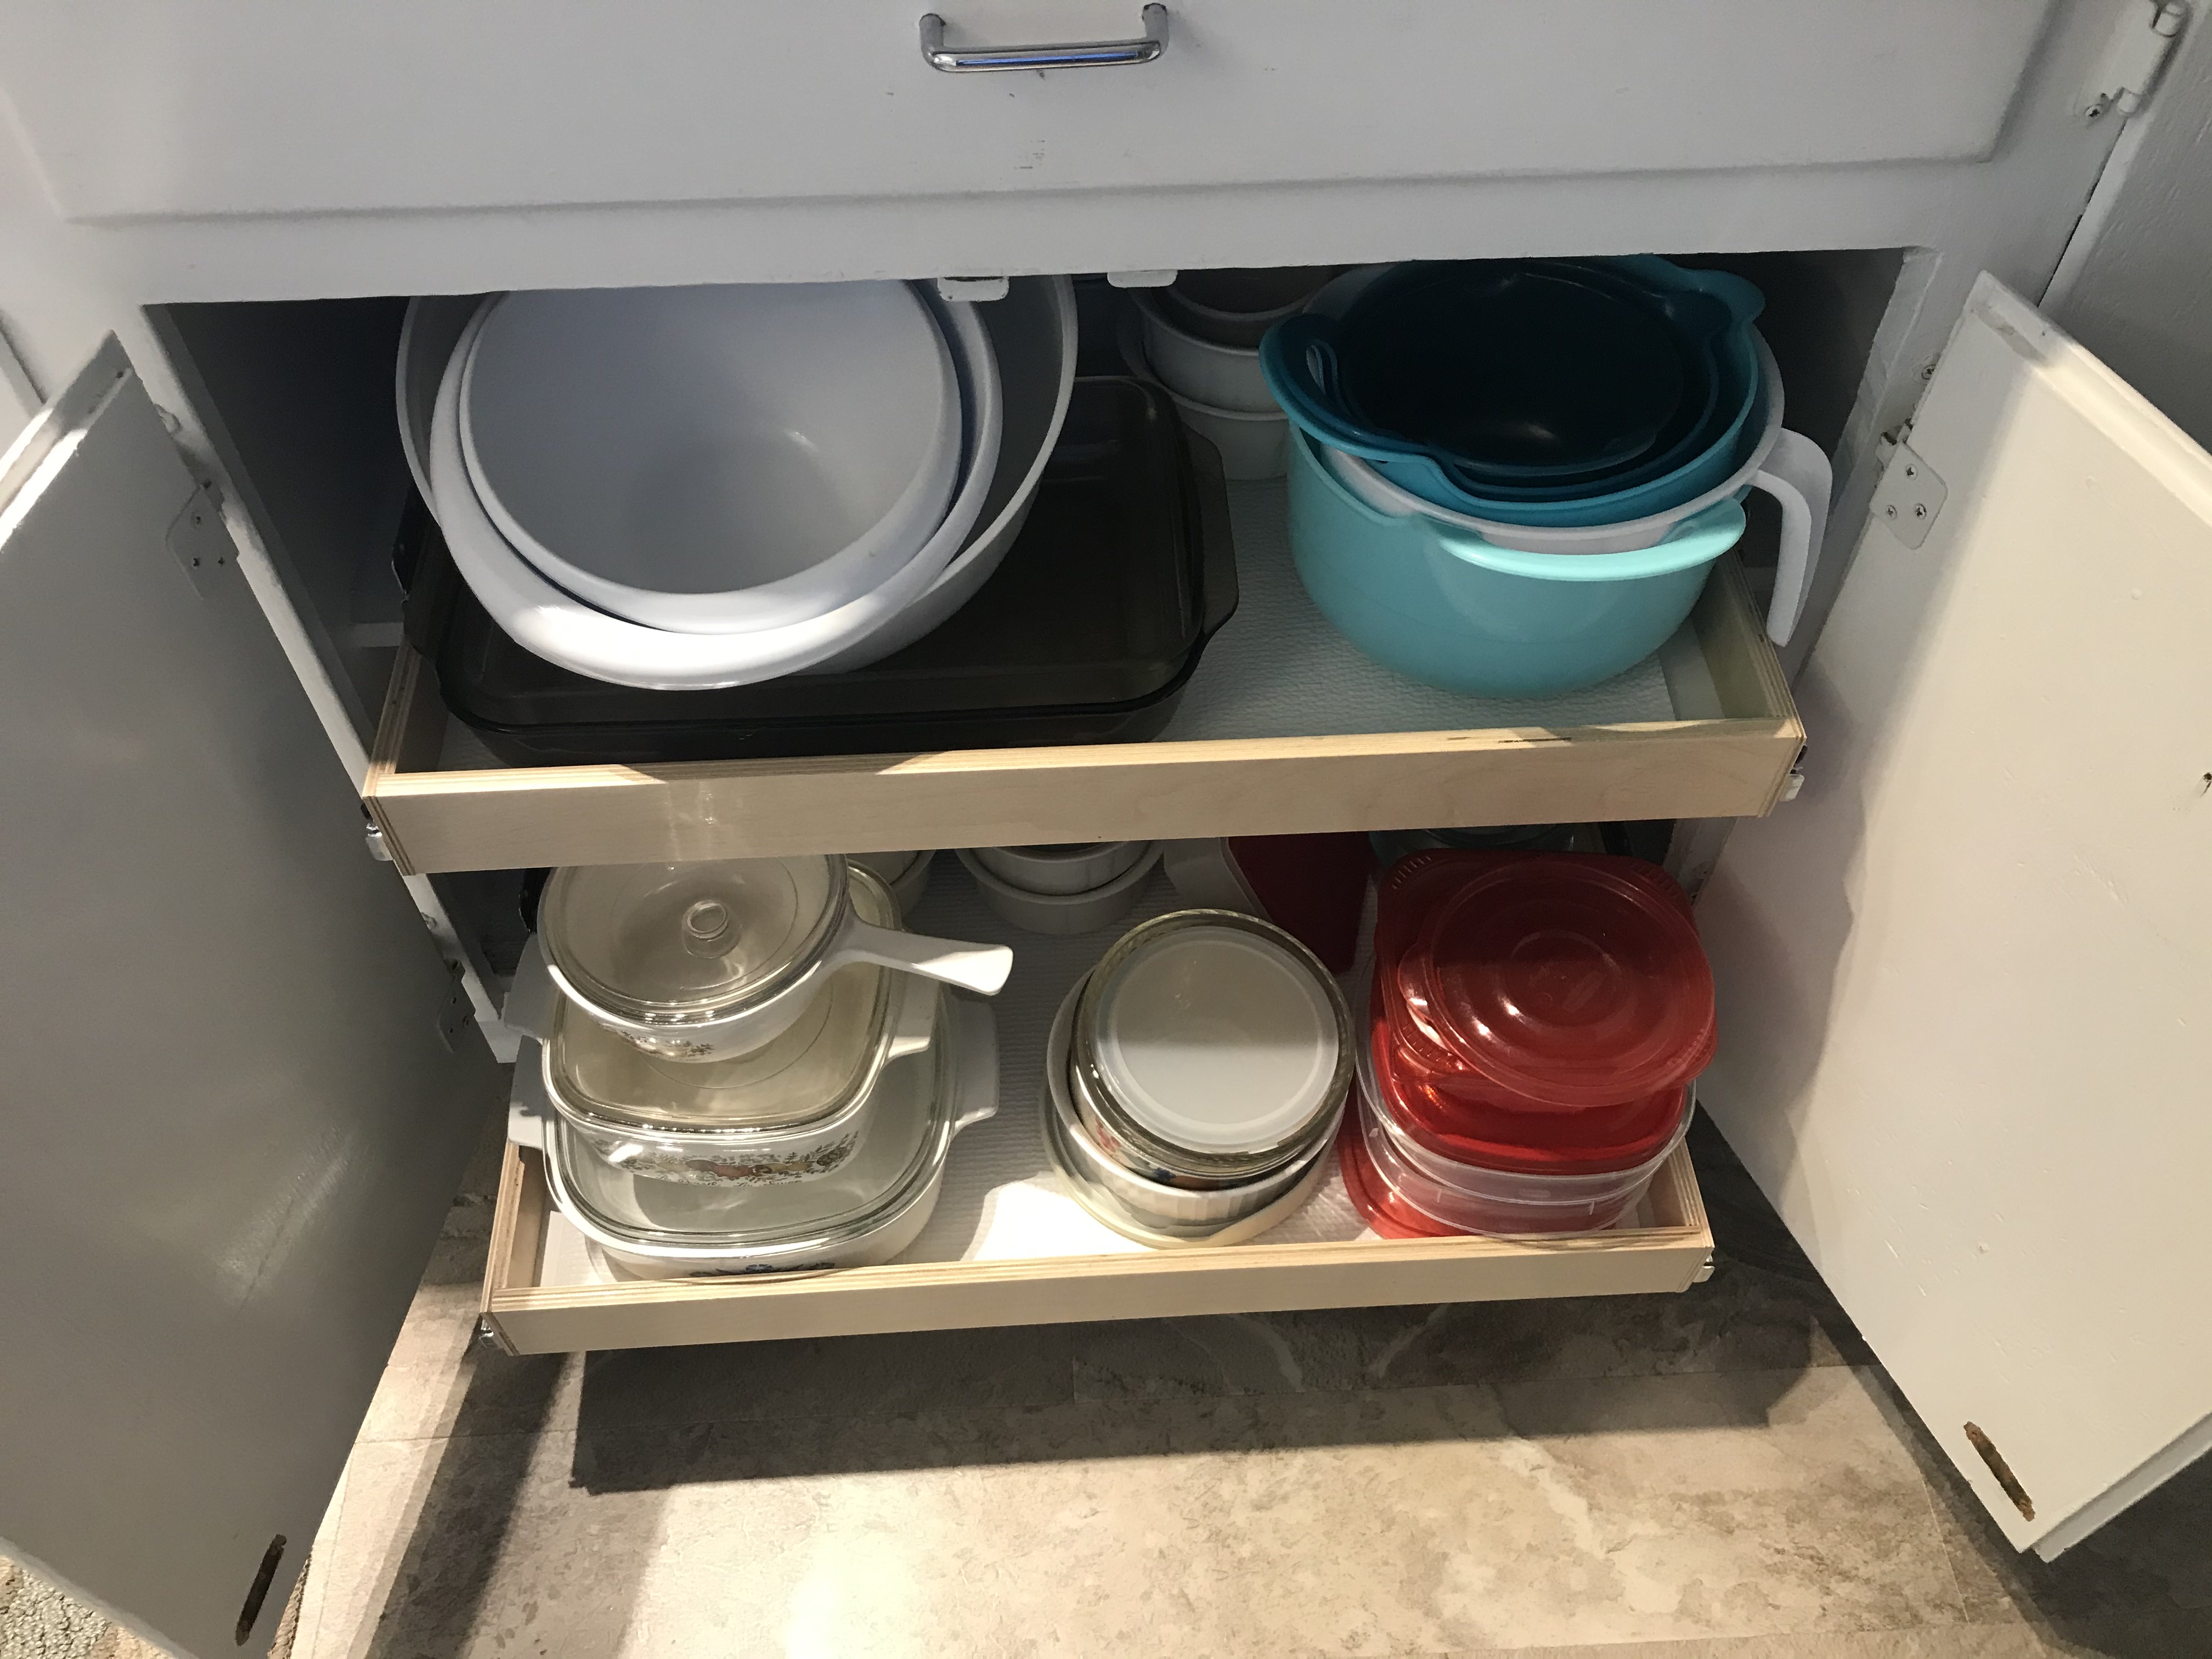 Kitchen Plate Storage Rack Kitchen Cabinet Built-in Pull-out